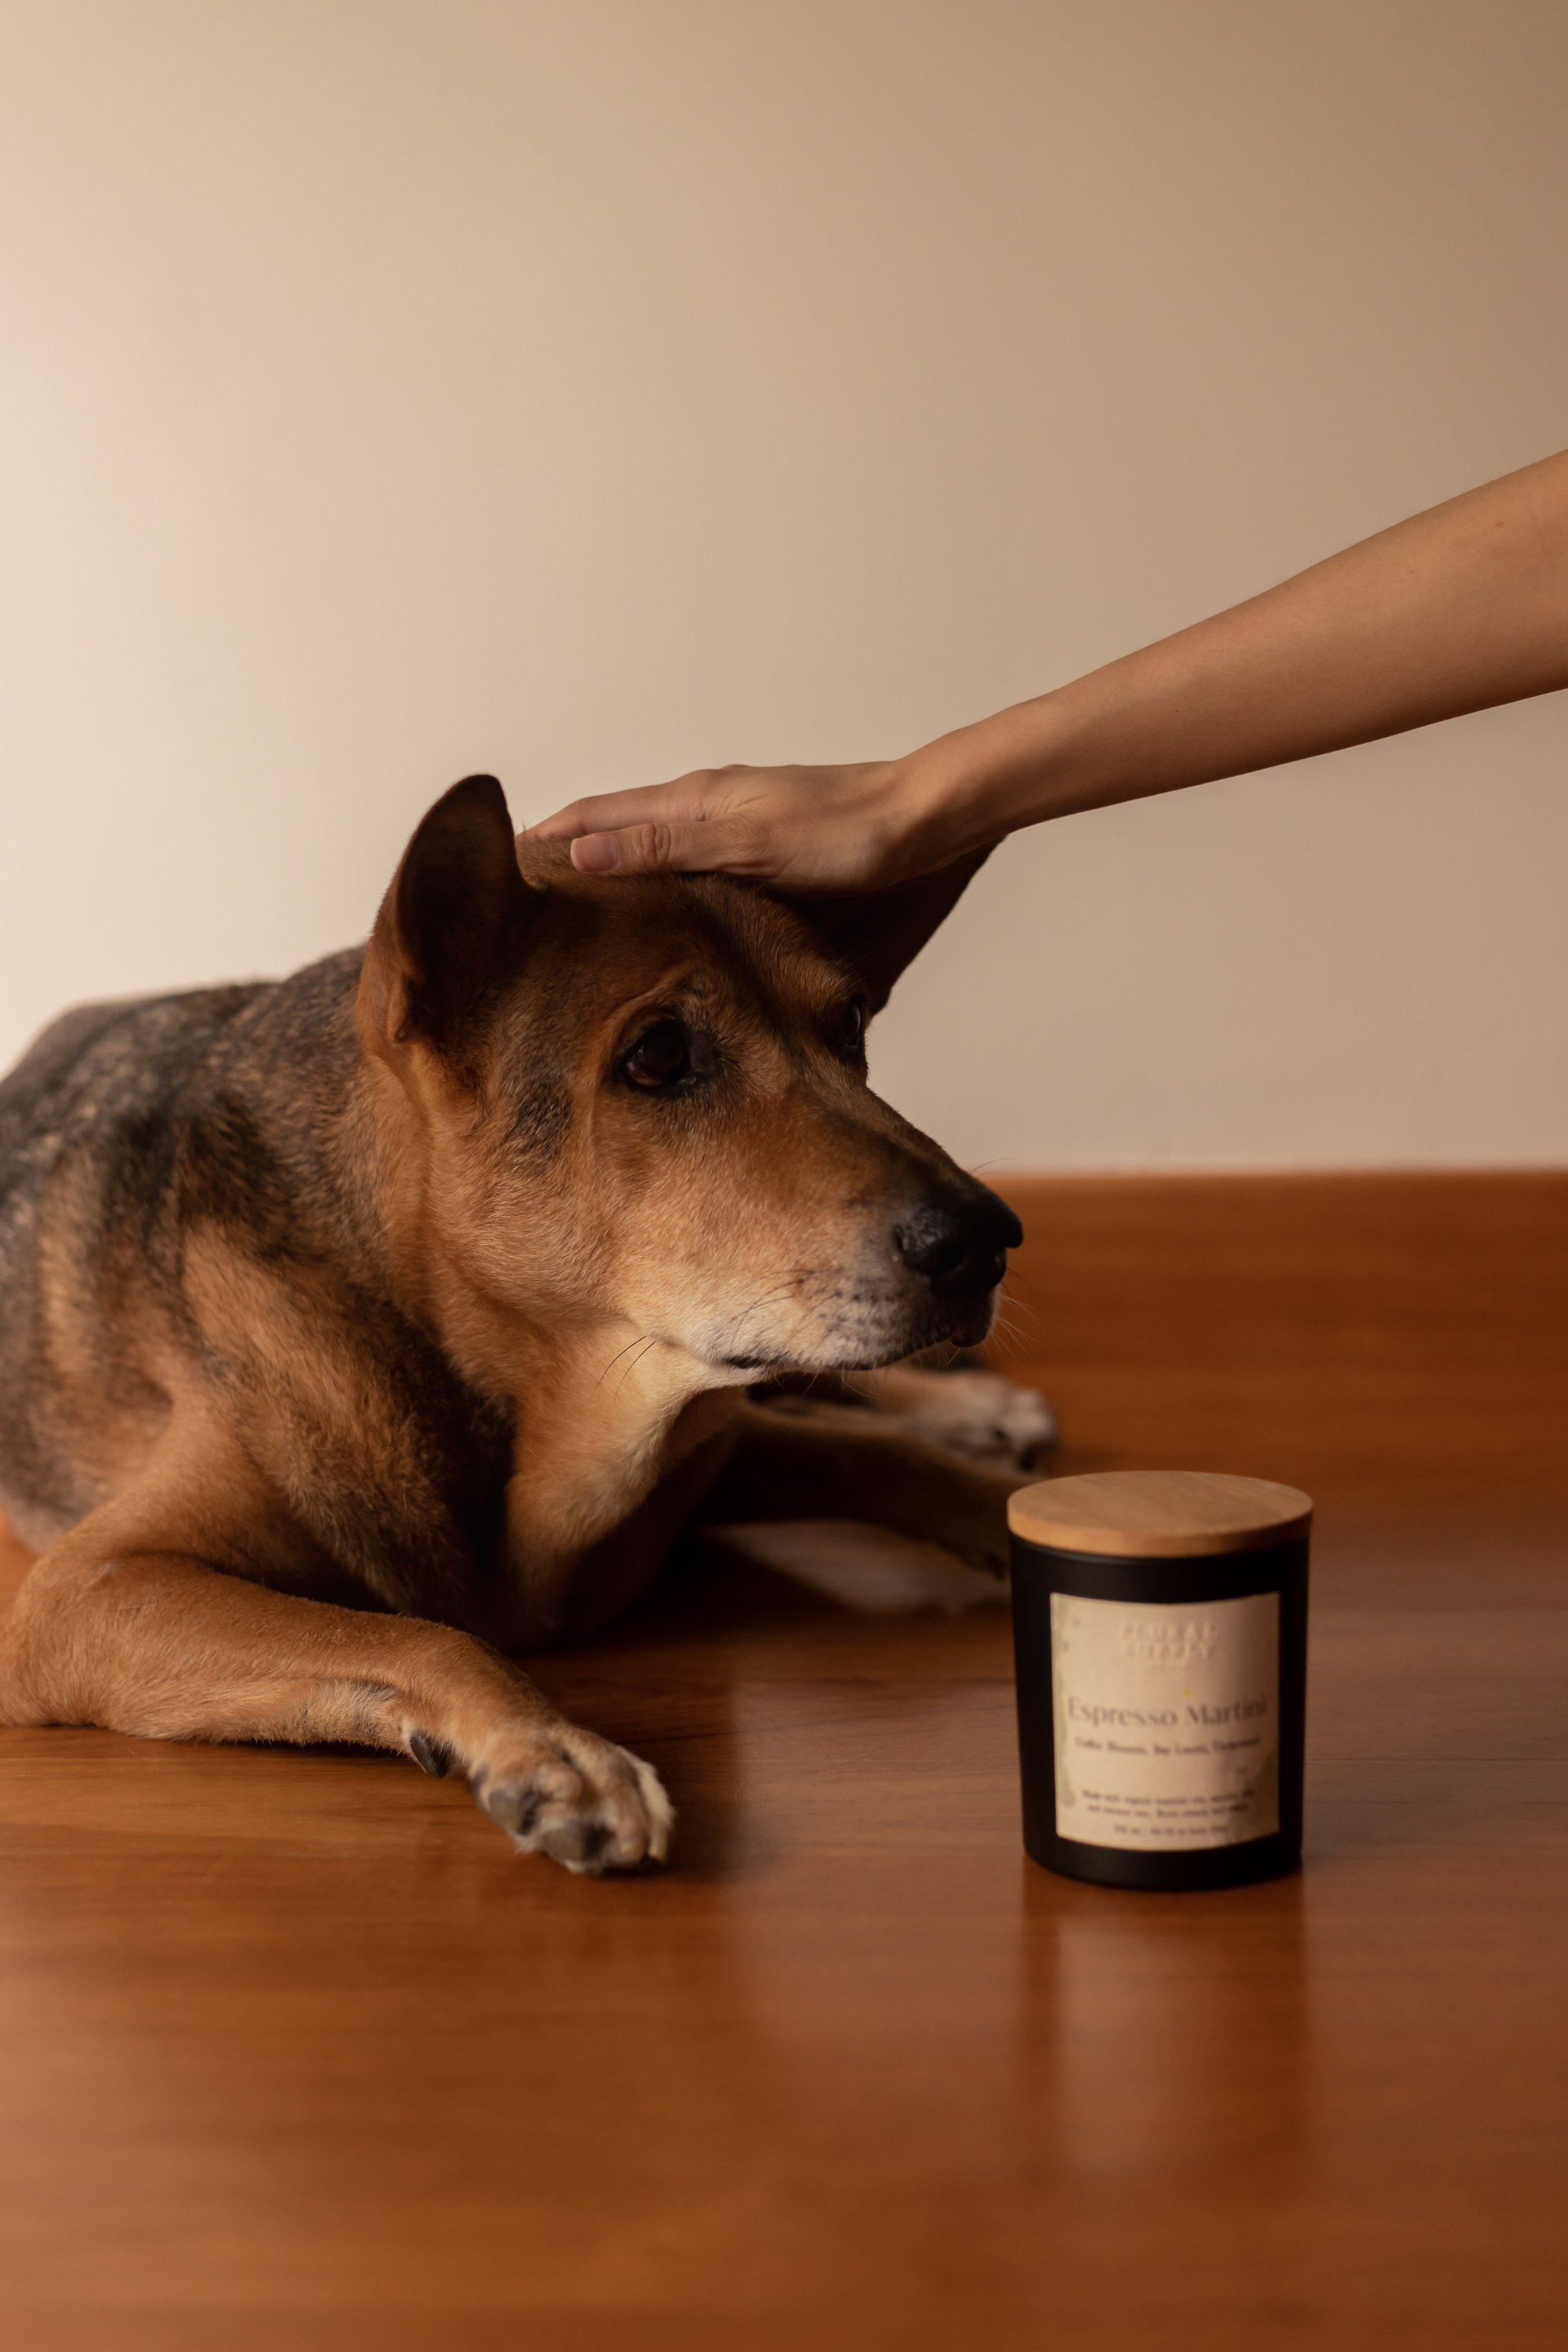 Are Wax Melts Safe For Dogs - Fosse Living